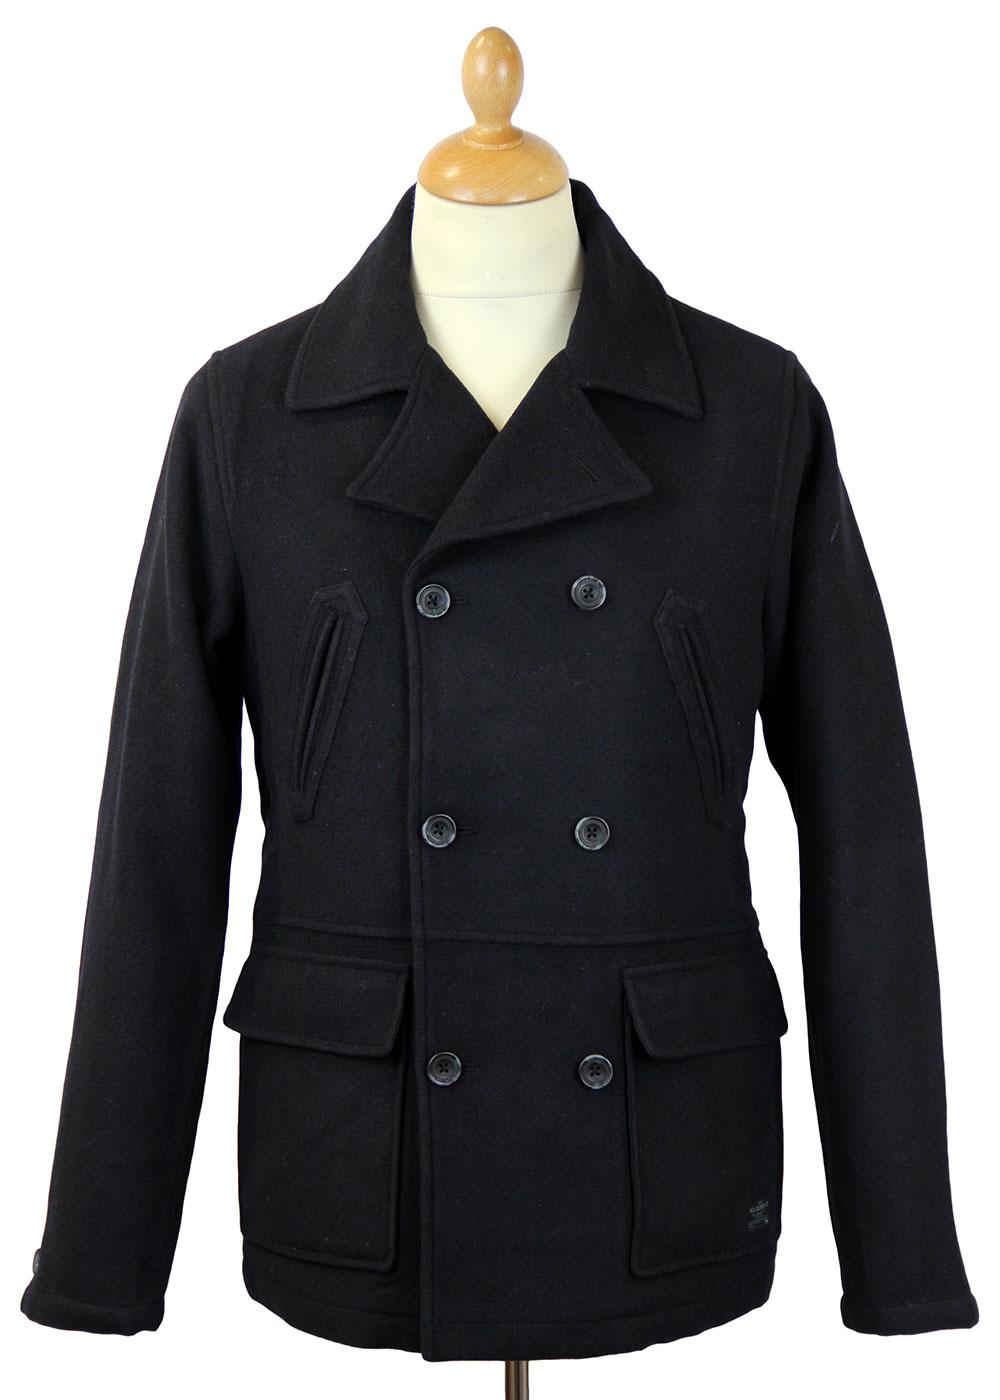 LEE Jeans Retro 60s Mod Double Breasted Pea Coat